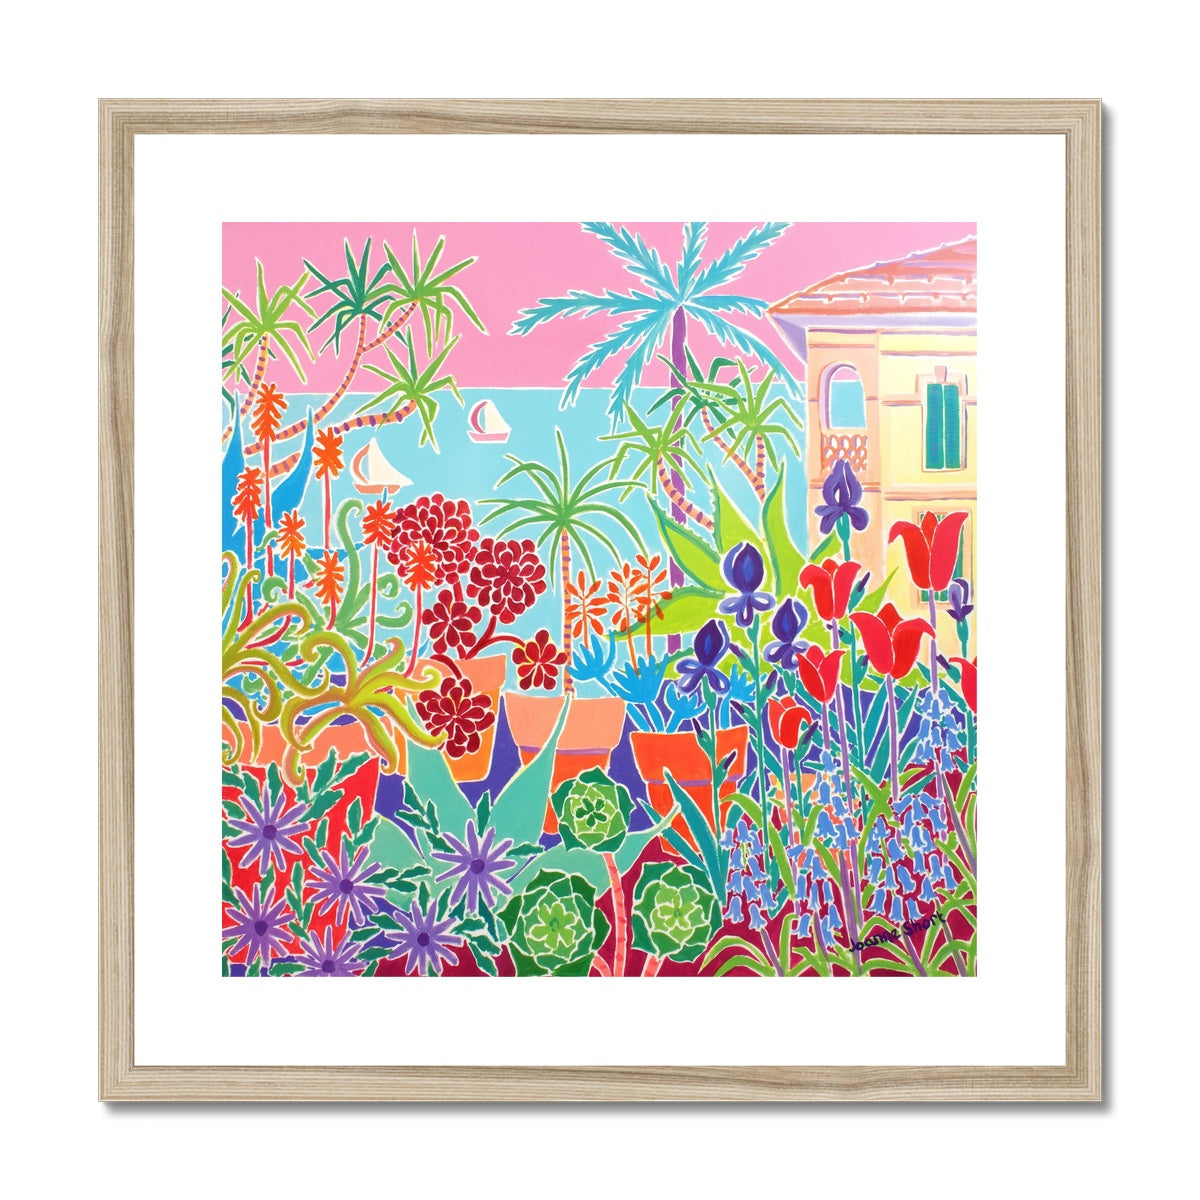 Joanne Short Framed Open Edition Cornish Fine Art Print. &#39;Patchwork Flowers and Pink Sky, Menton&#39;. French Art Gallery